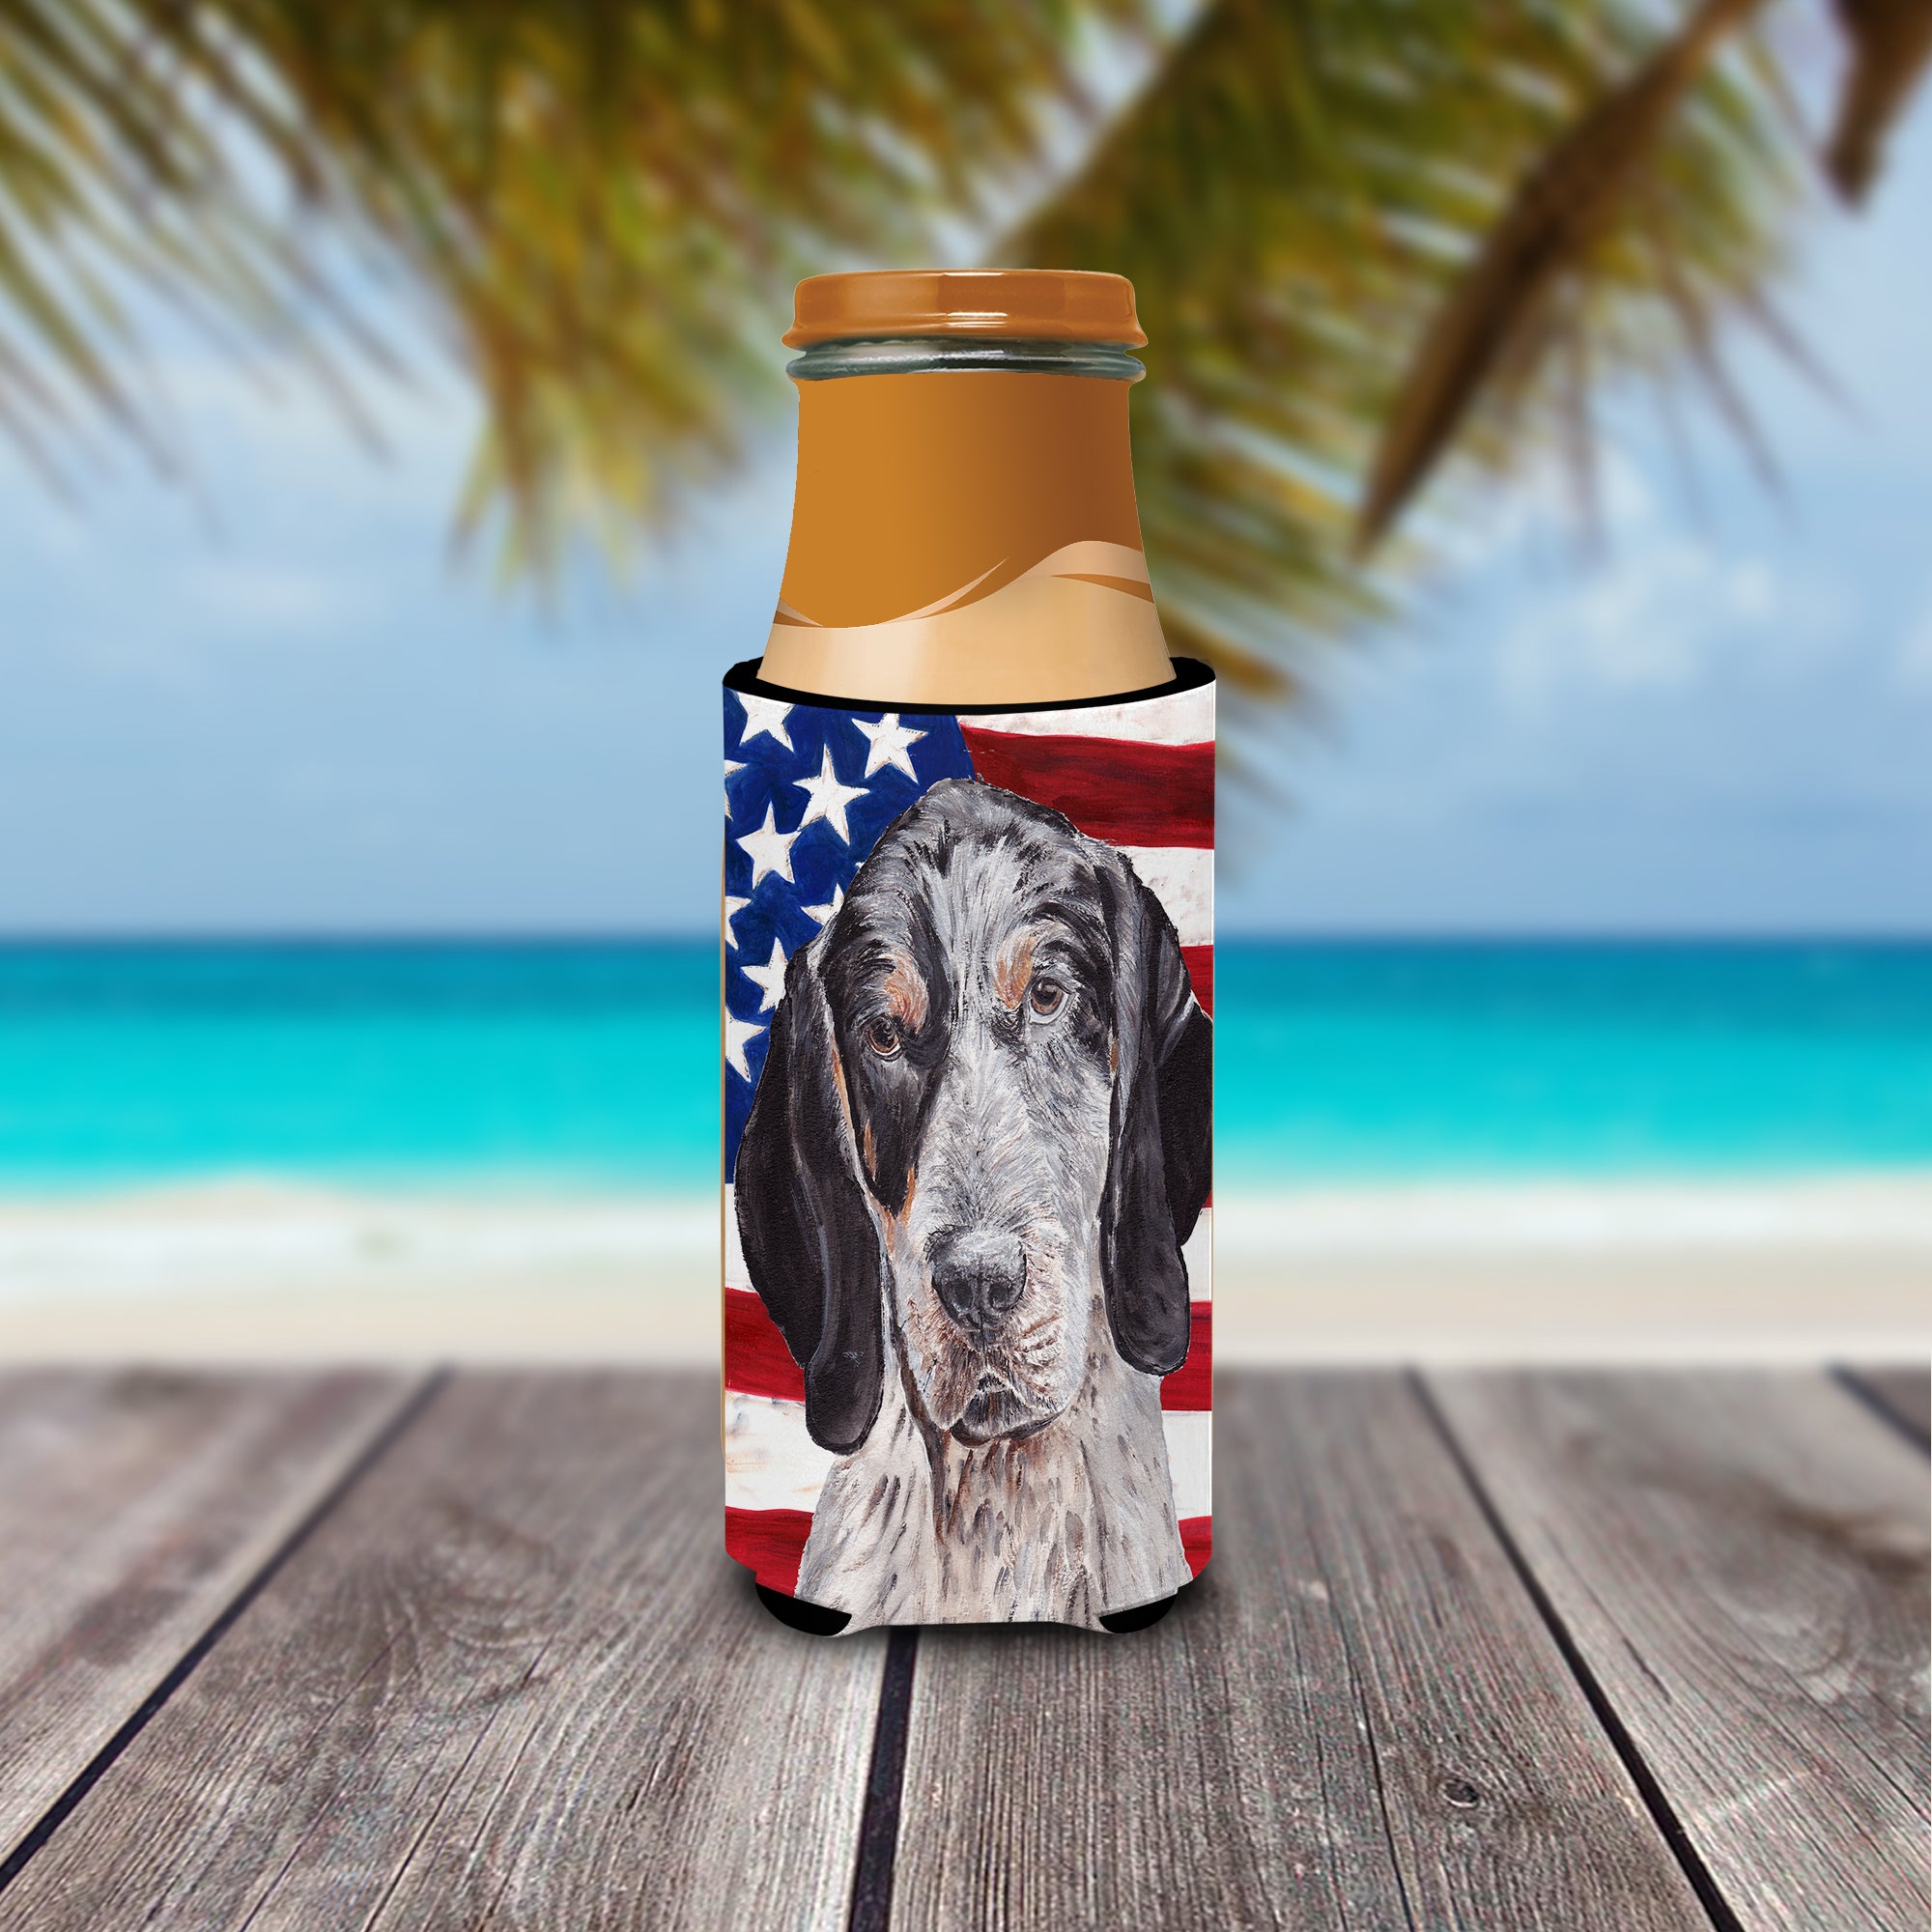 Blue Tick Coonhound with American Flag USA Ultra Beverage Insulators for slim cans SC9625MUK